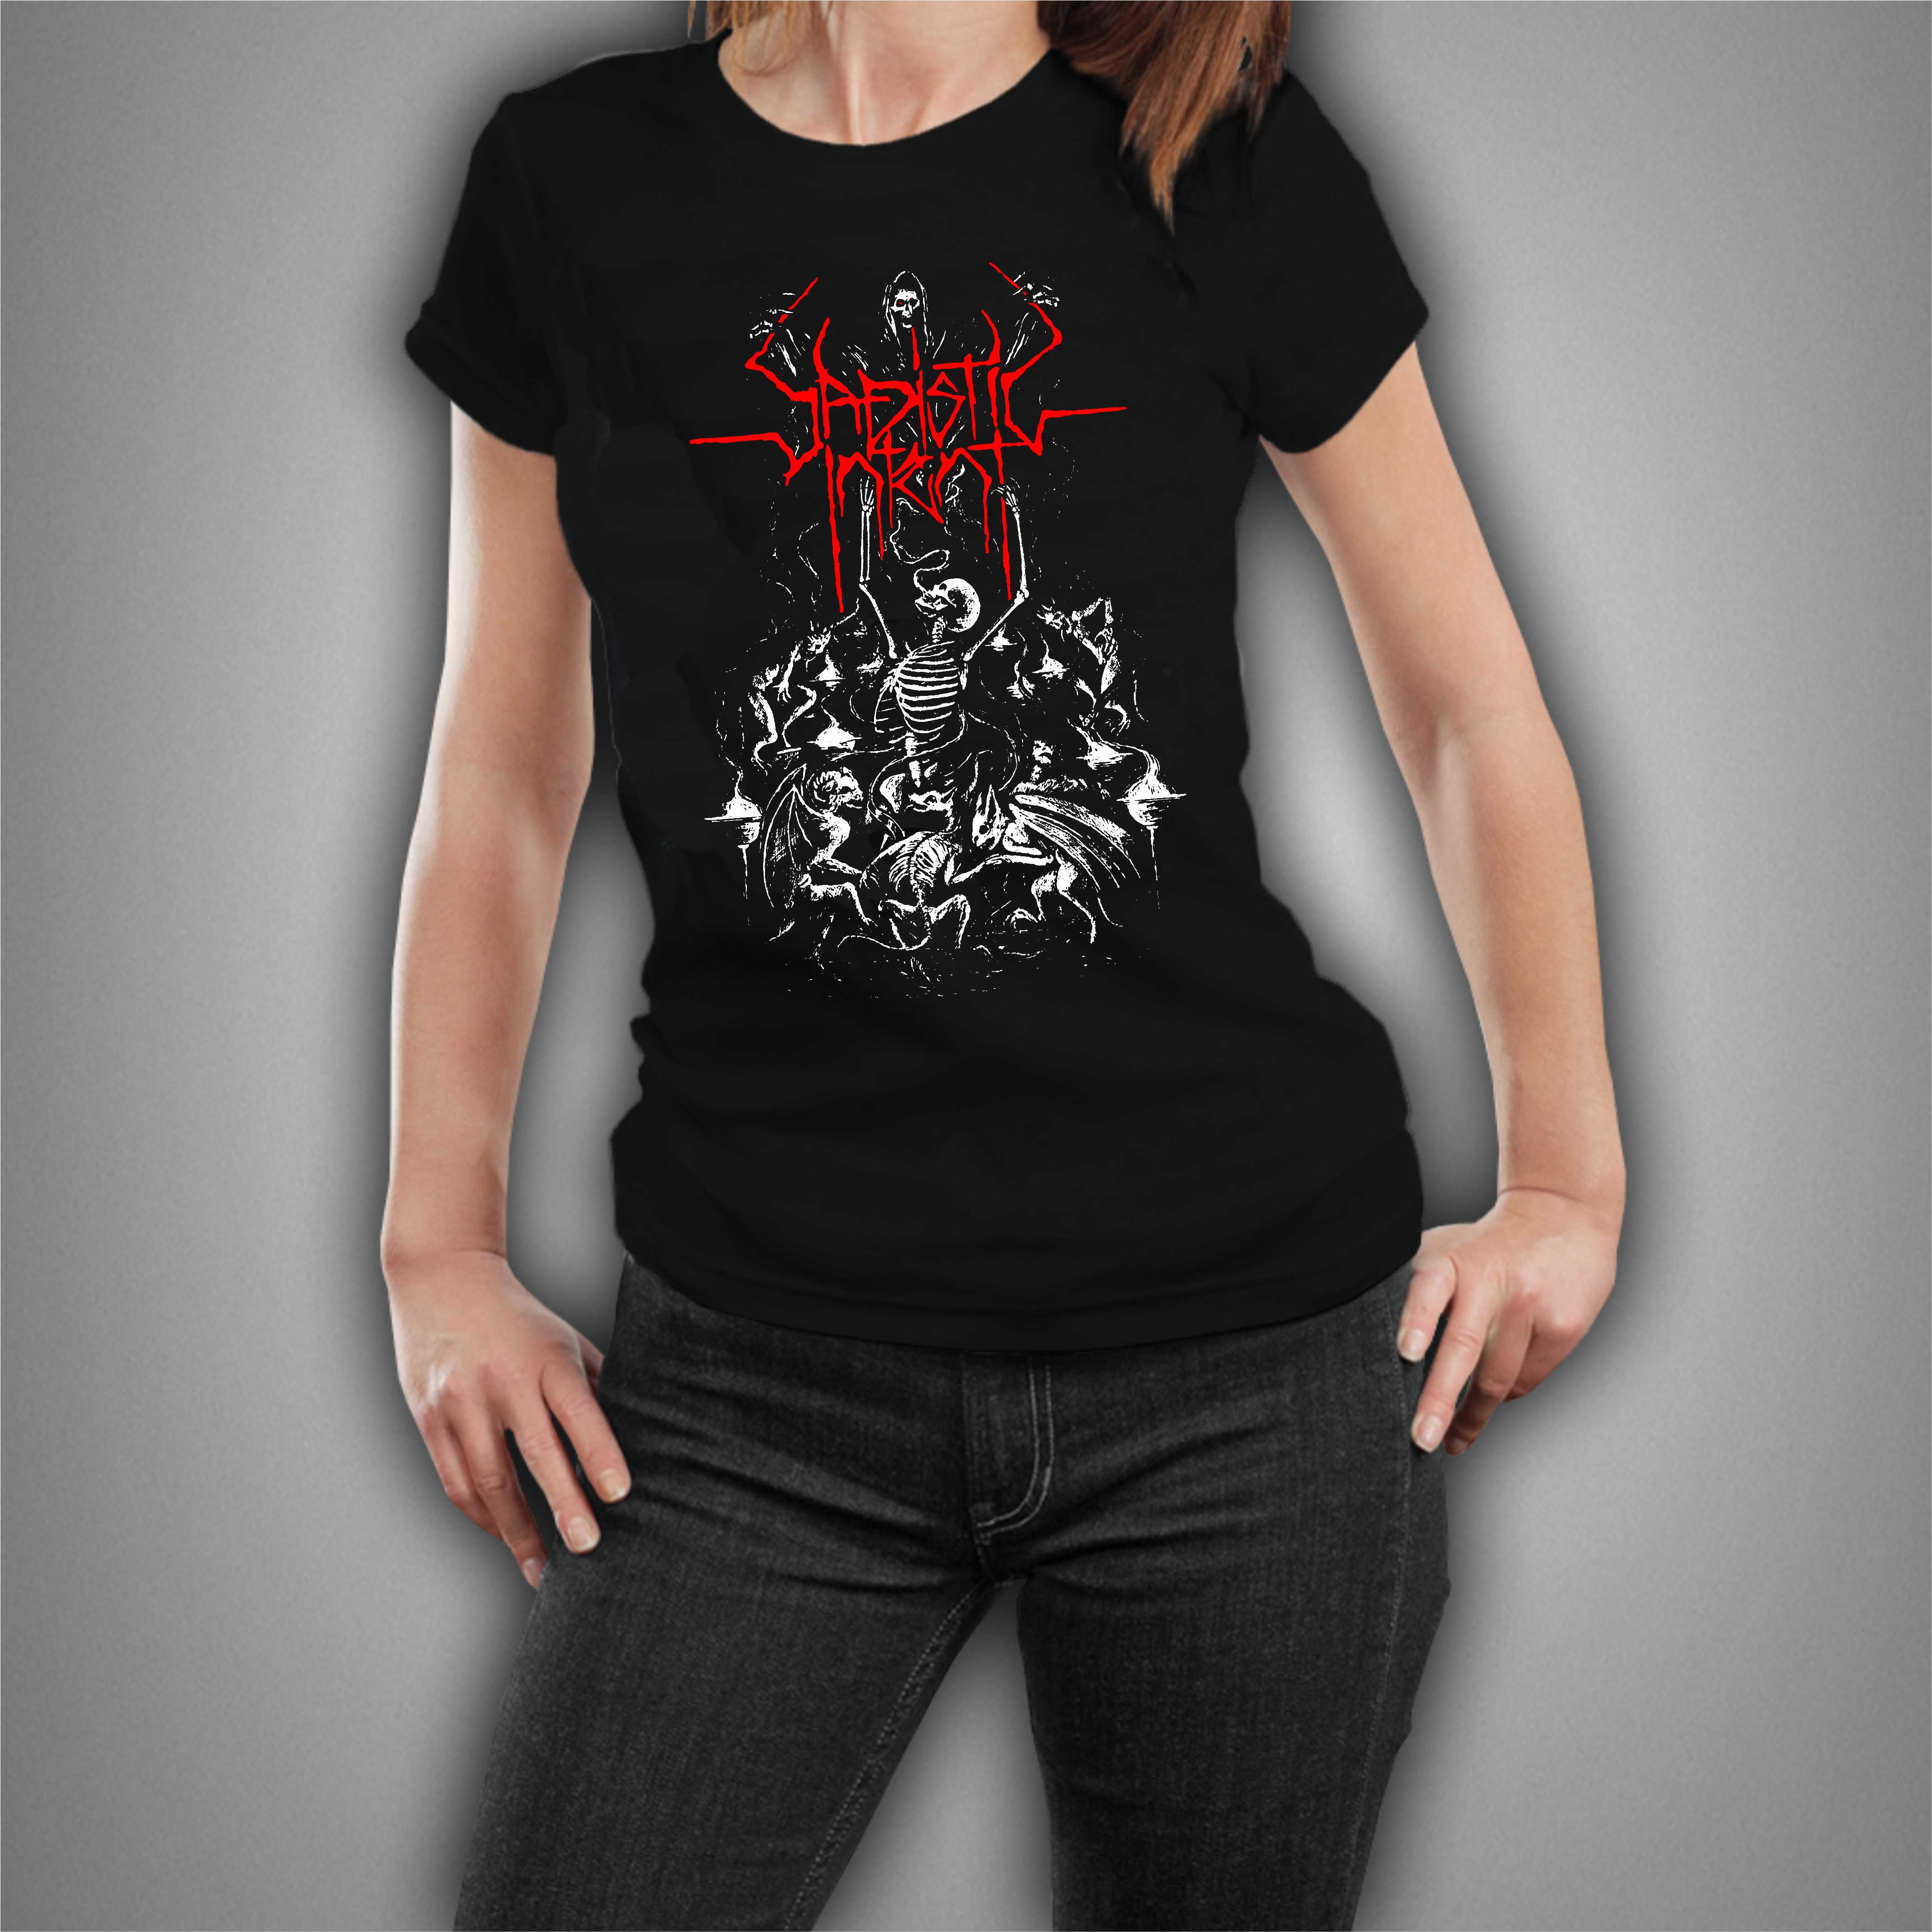 Sadistic Intent Girlie T-Shirt – Metal & Rock T-shirts and Accessories